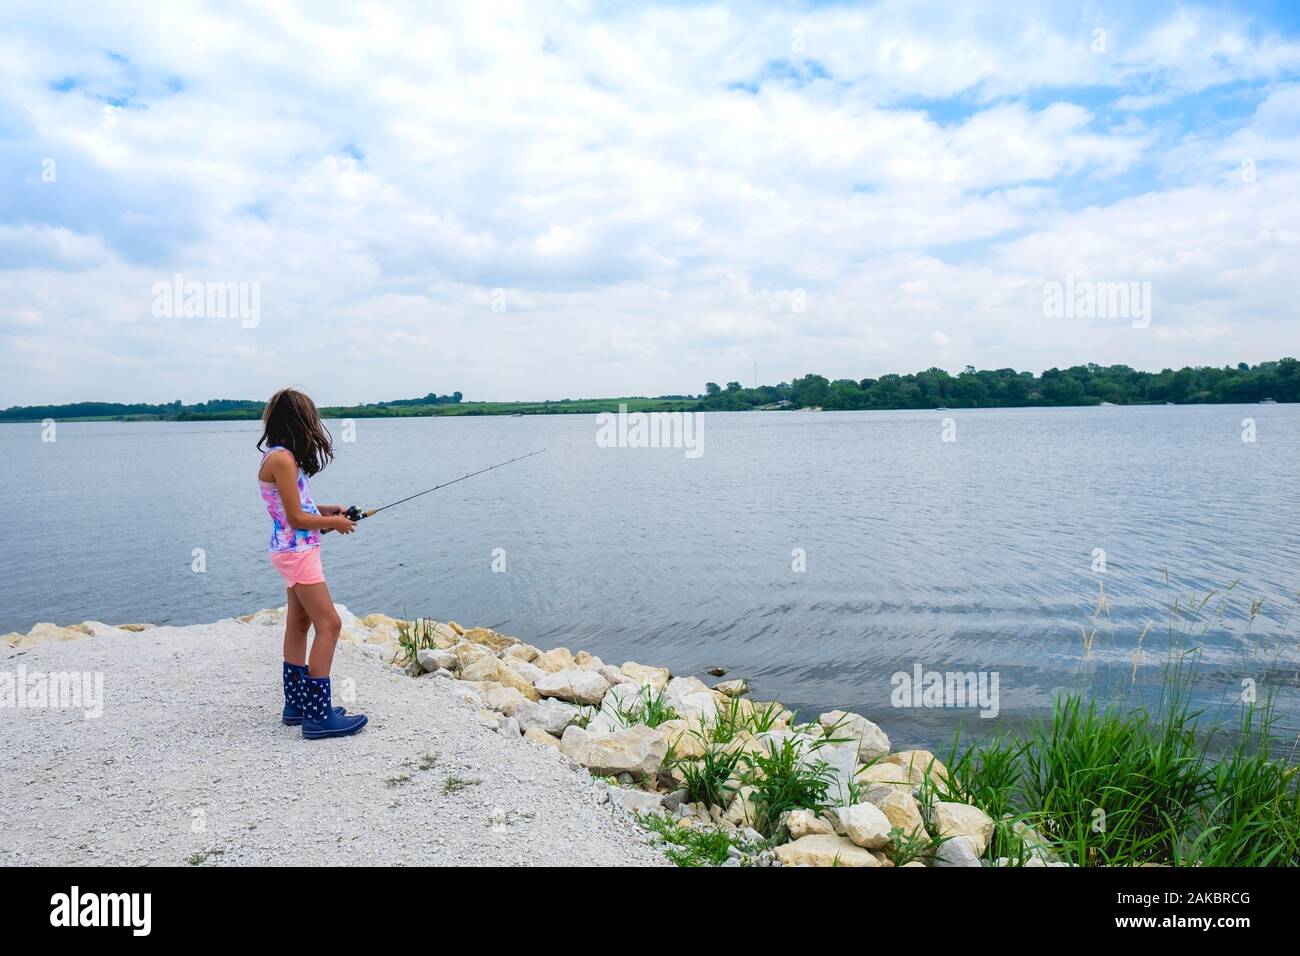 Teen Girl 10-12 years old standing near water fishing on summer day Stock Photo